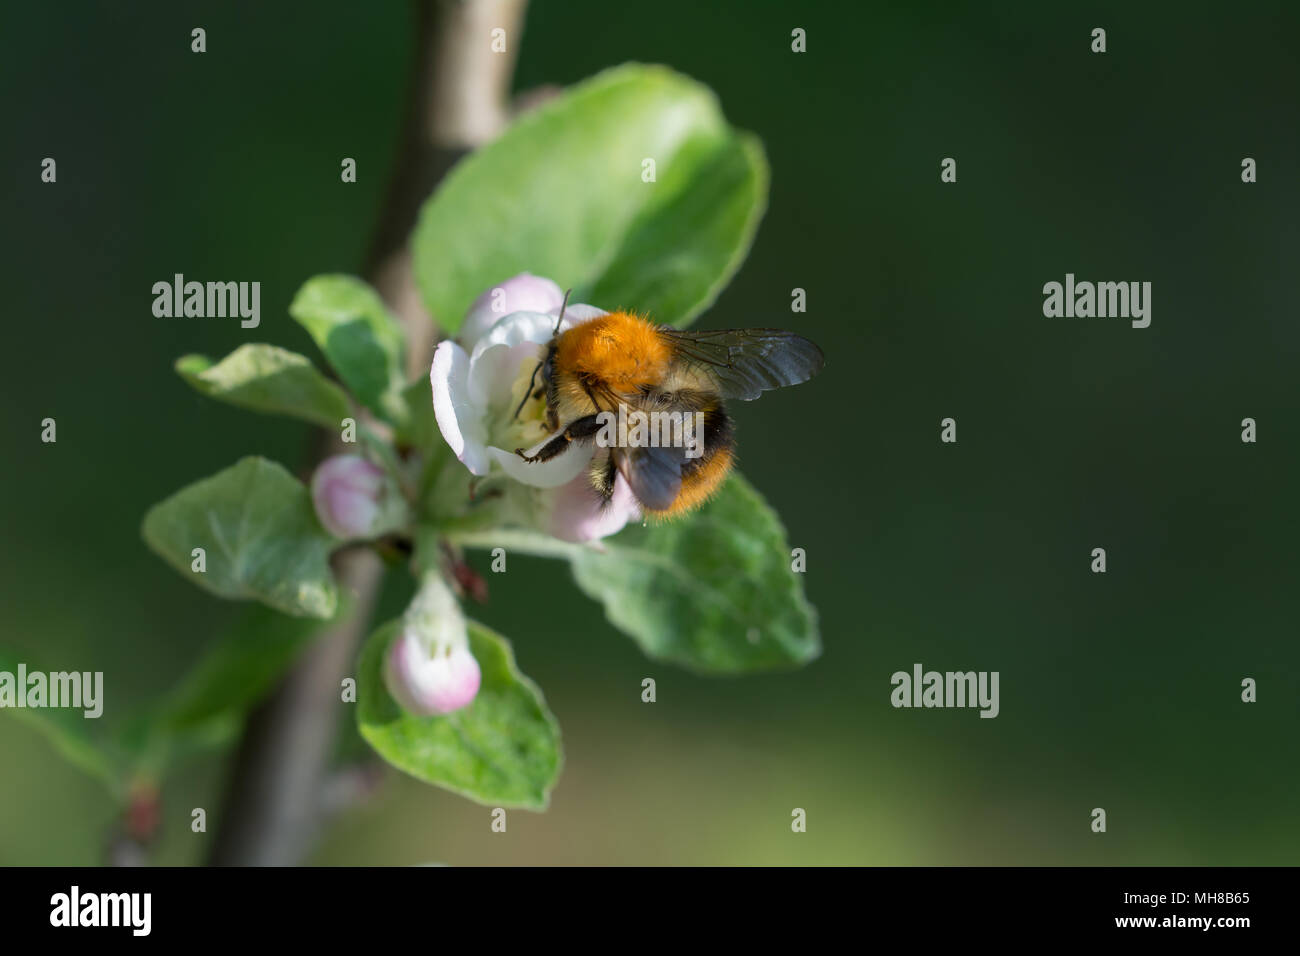 An appletree twig with an open bud and a bumblebee feasting on it Stock Photo